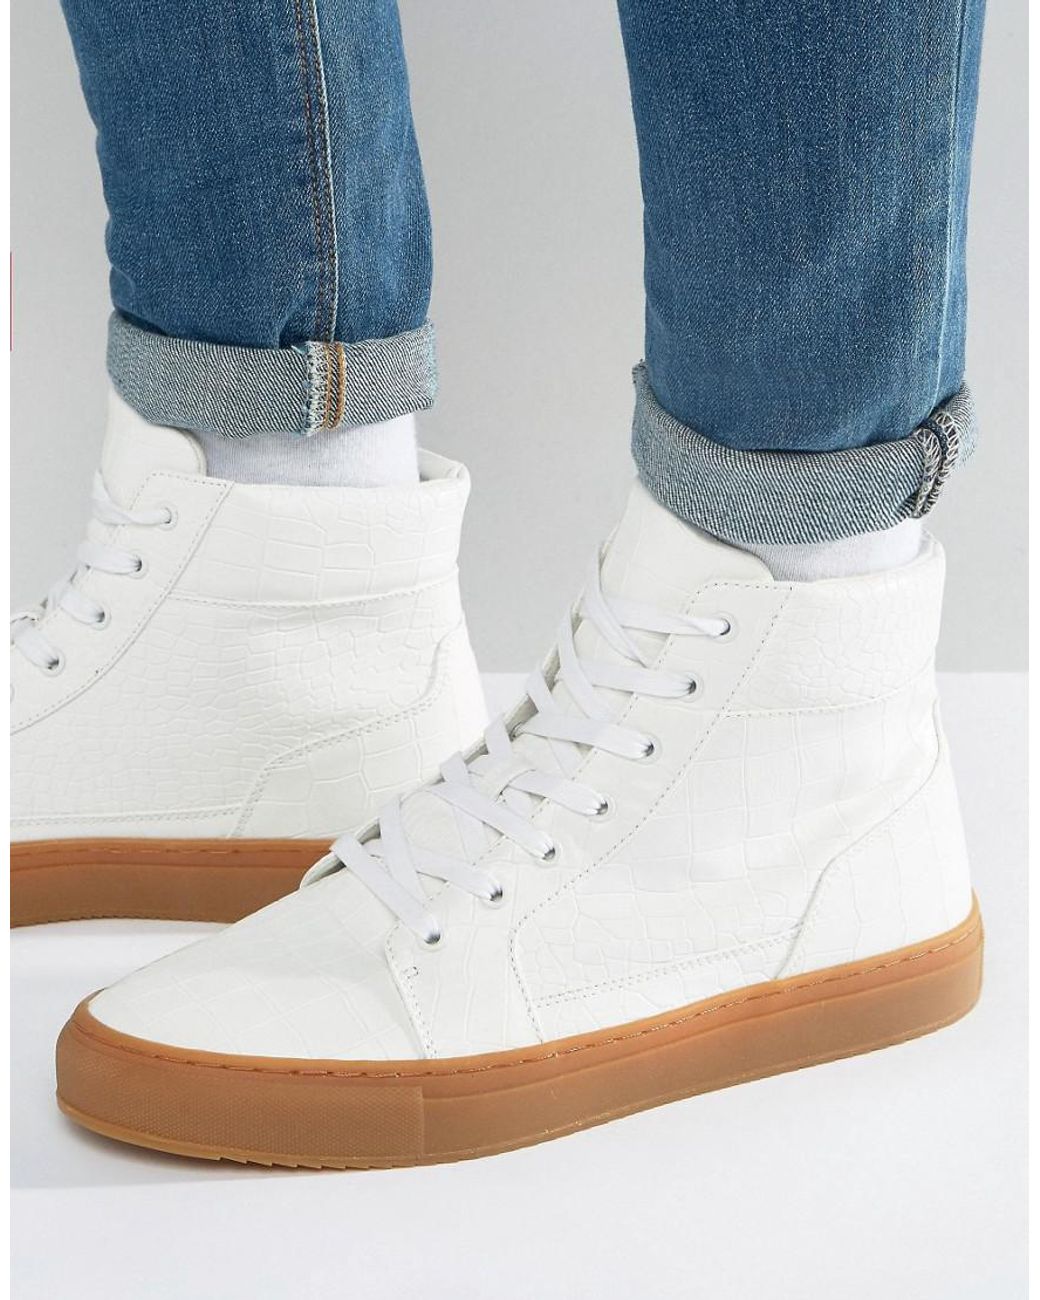 Aggregate more than 270 white sneakers brown sole best